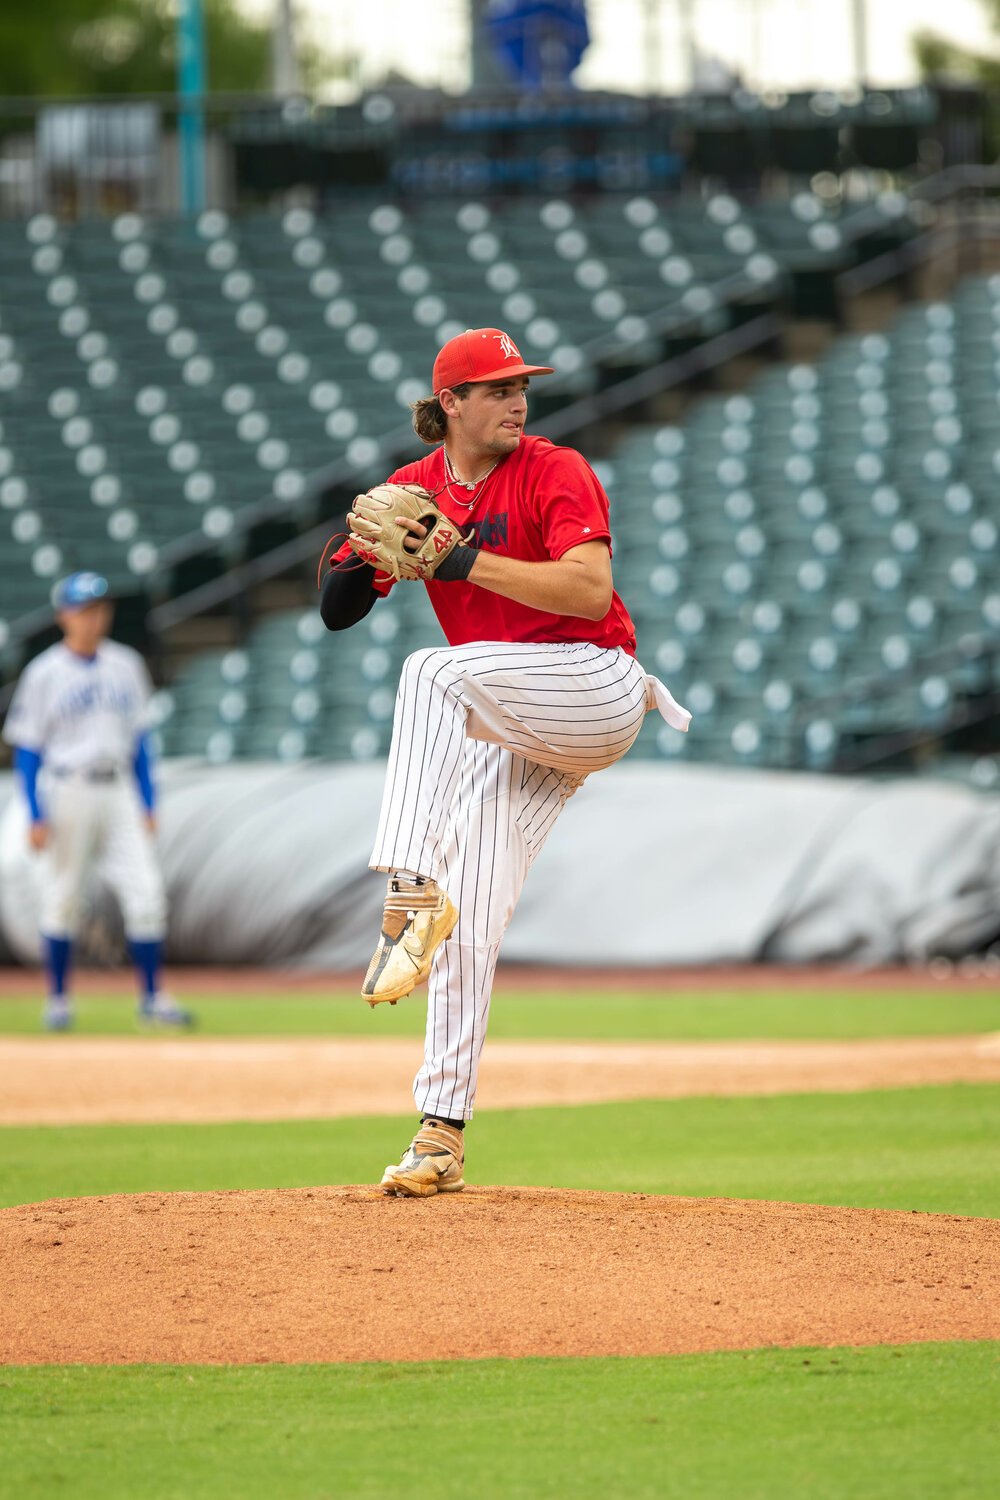 Cole Kaase pitches during Tuesday's GHBCA Senior All-Star game at Constellation Field in Sugar Land.